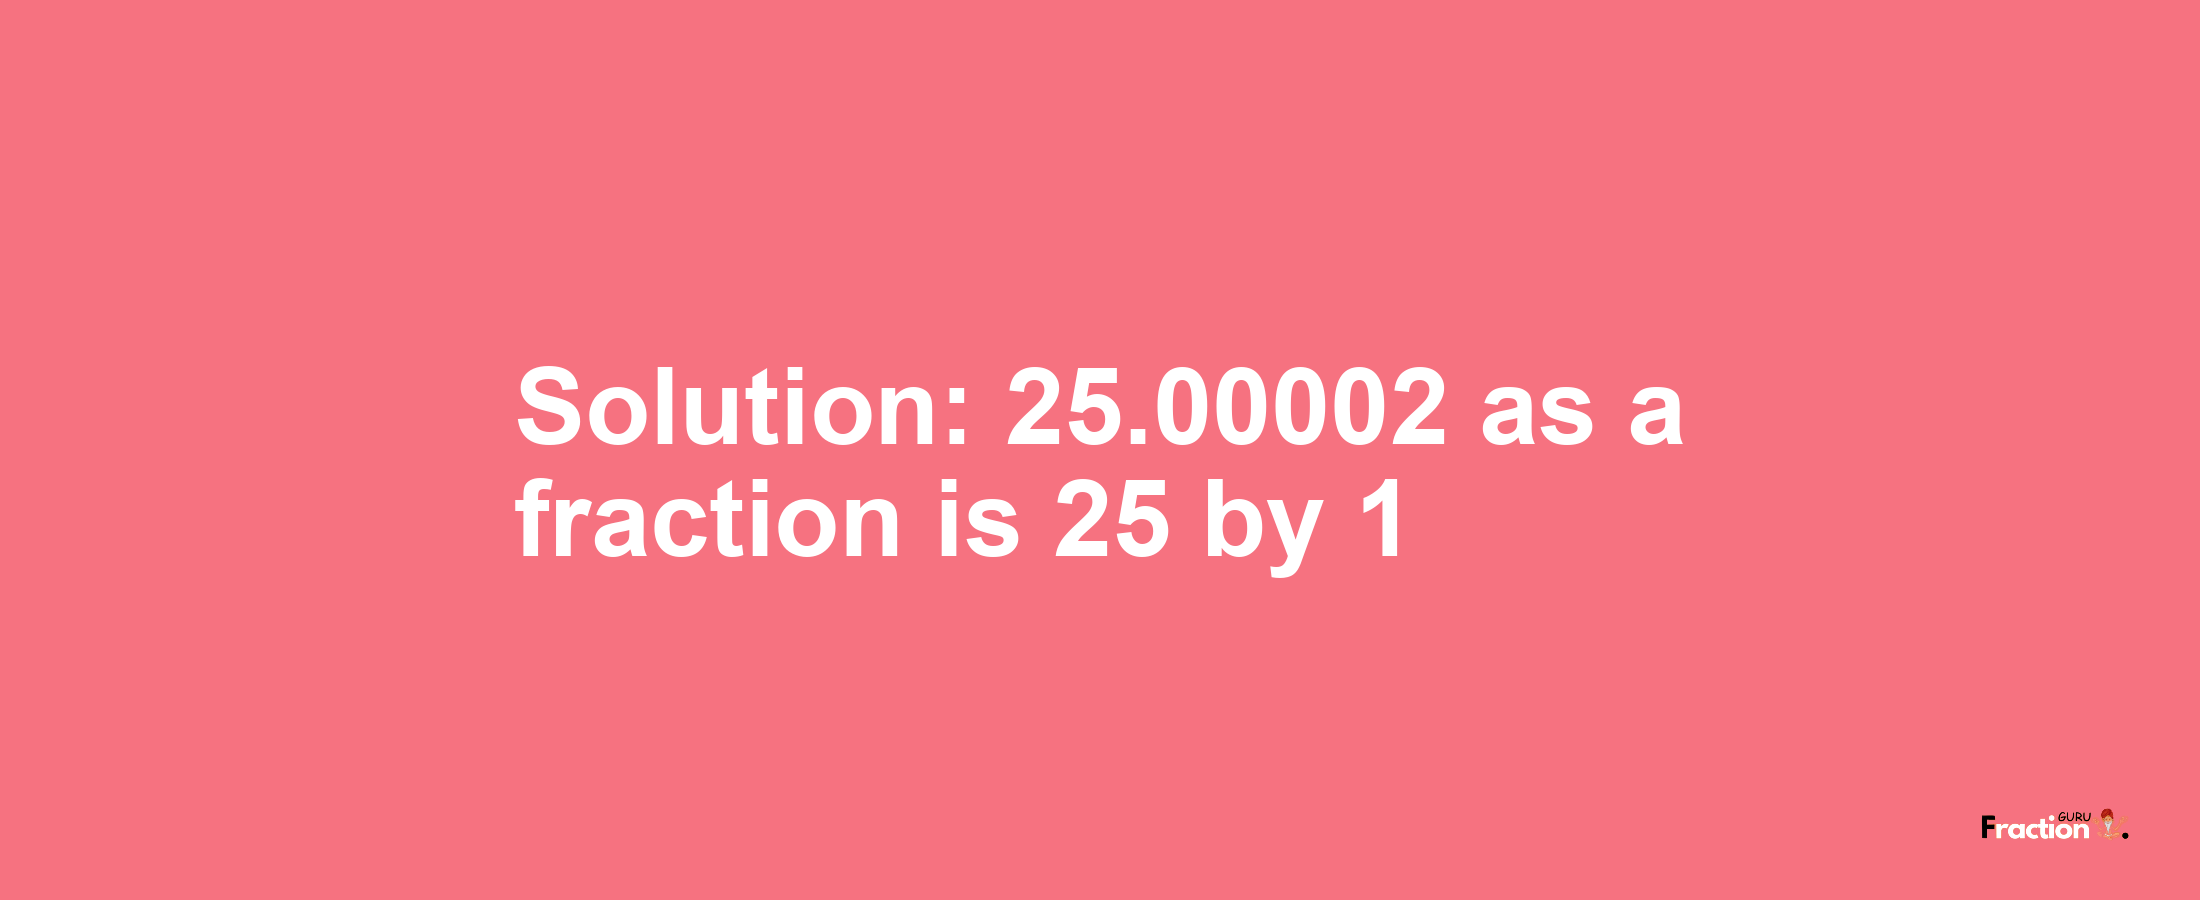 Solution:25.00002 as a fraction is 25/1